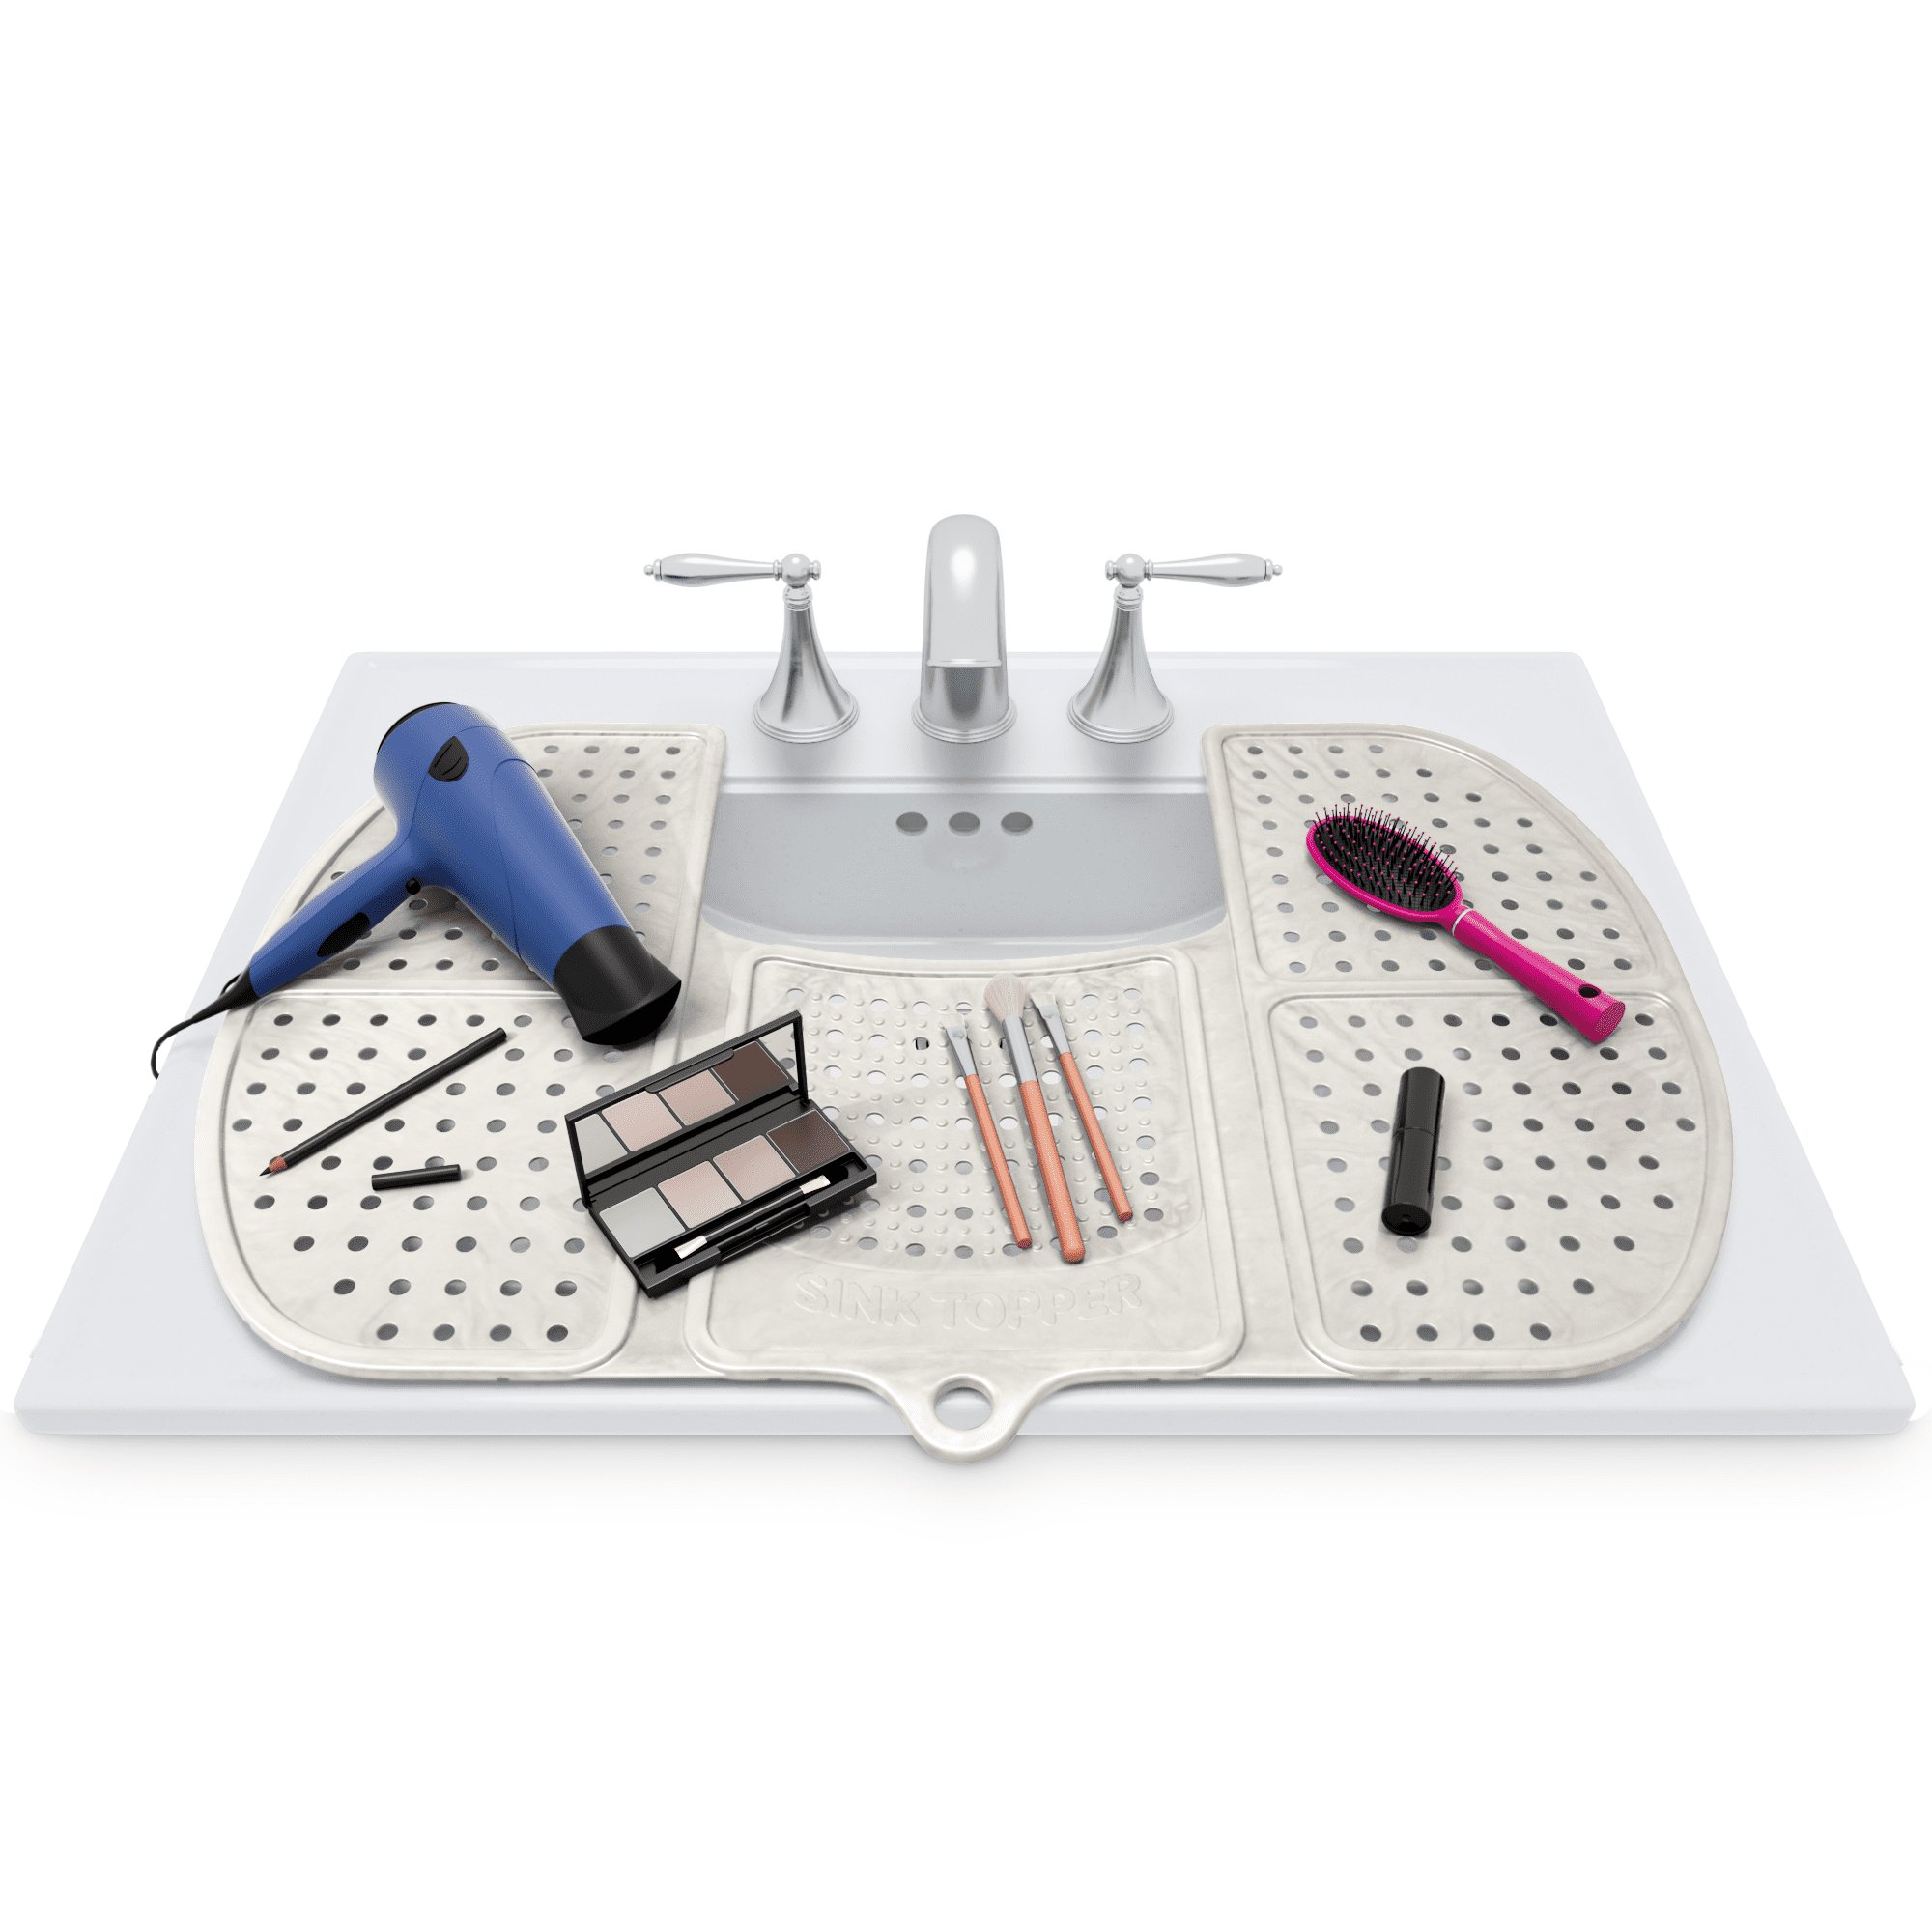 Top-It Sink Mat for More Counter Space. Rollable Sink Cover. Sink Topper. Makeup Organizer Mat. Must Have Bathroom Accessory. (White)